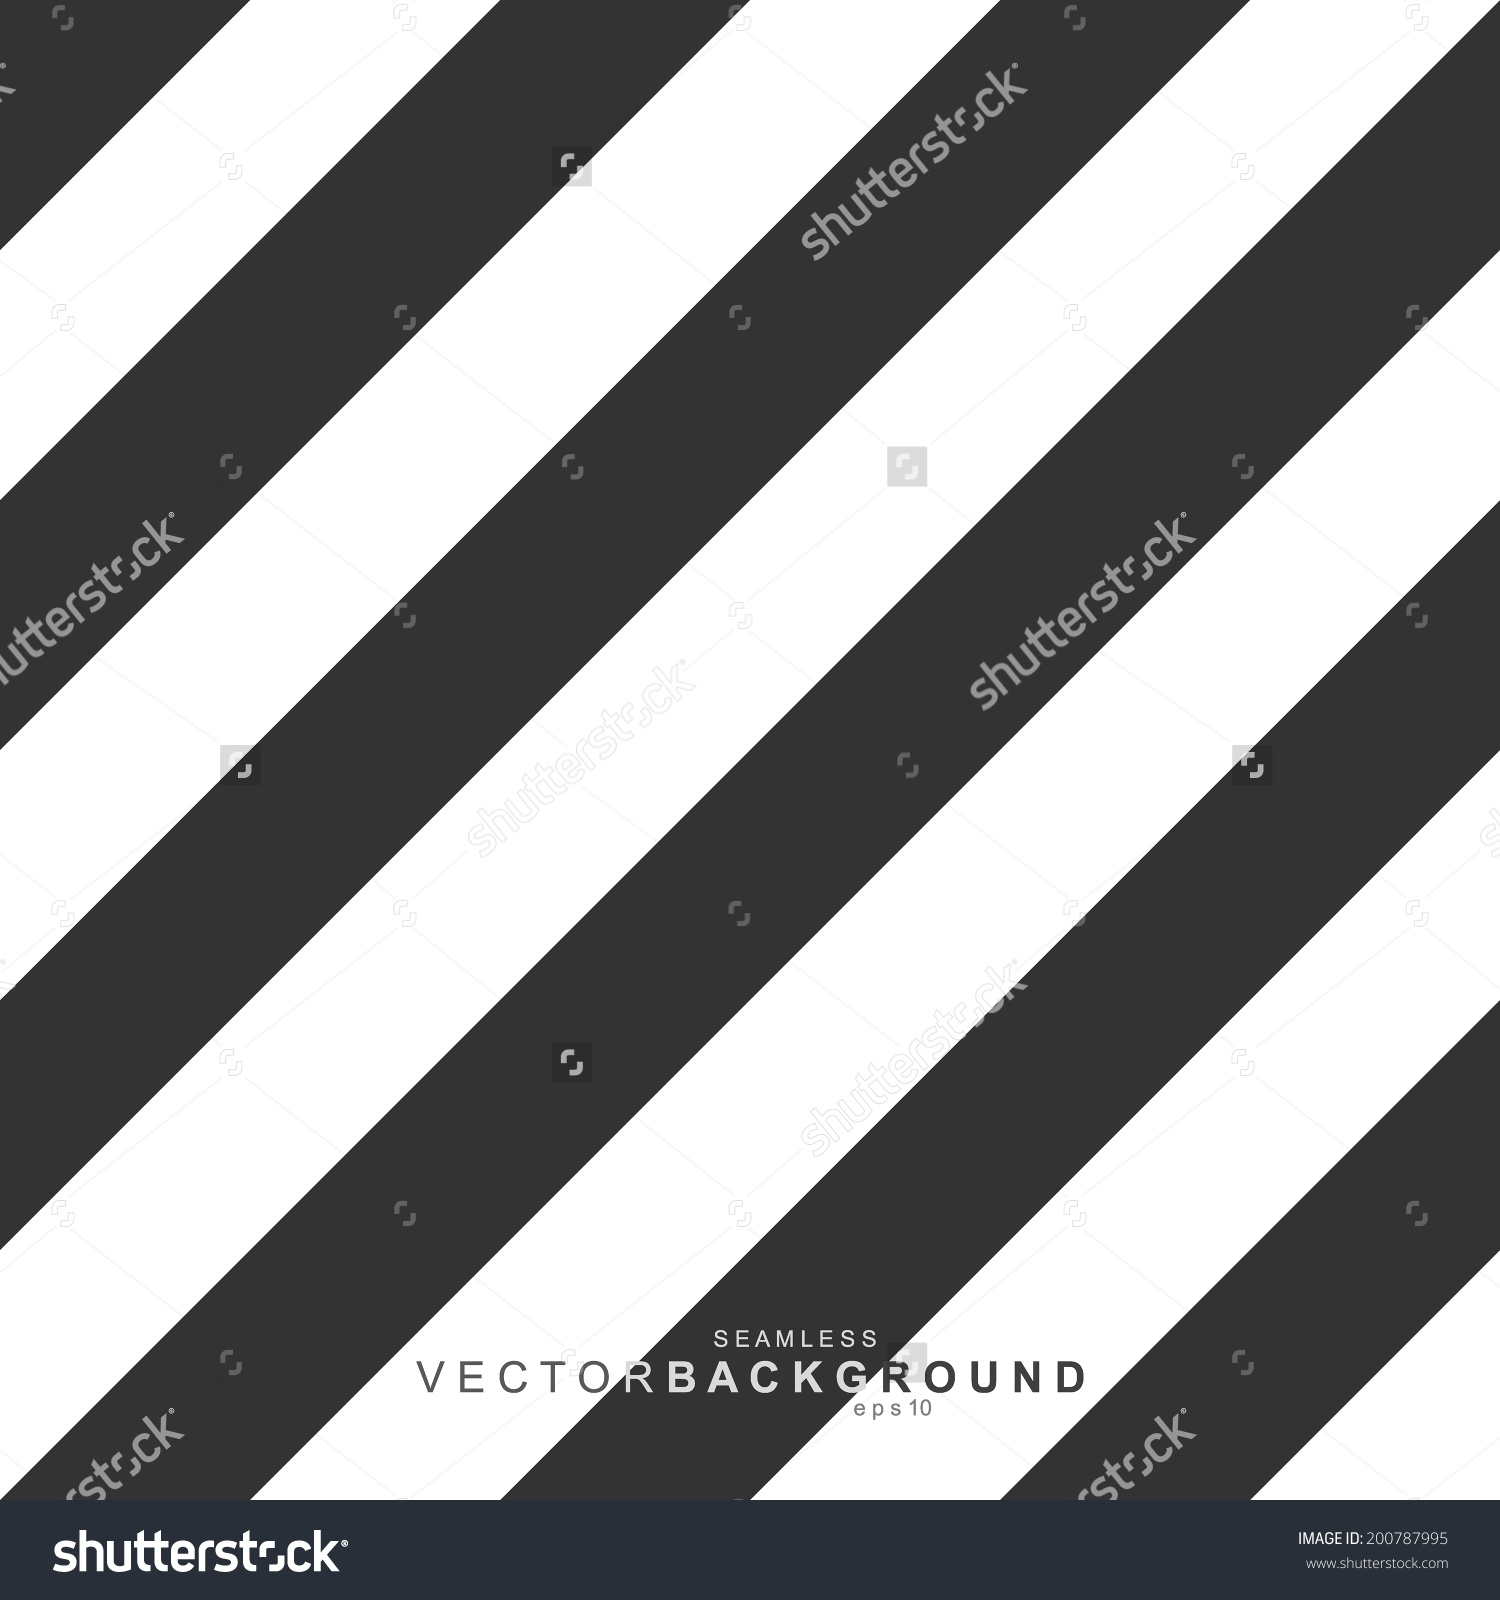 Black and White Straight Line Patterns